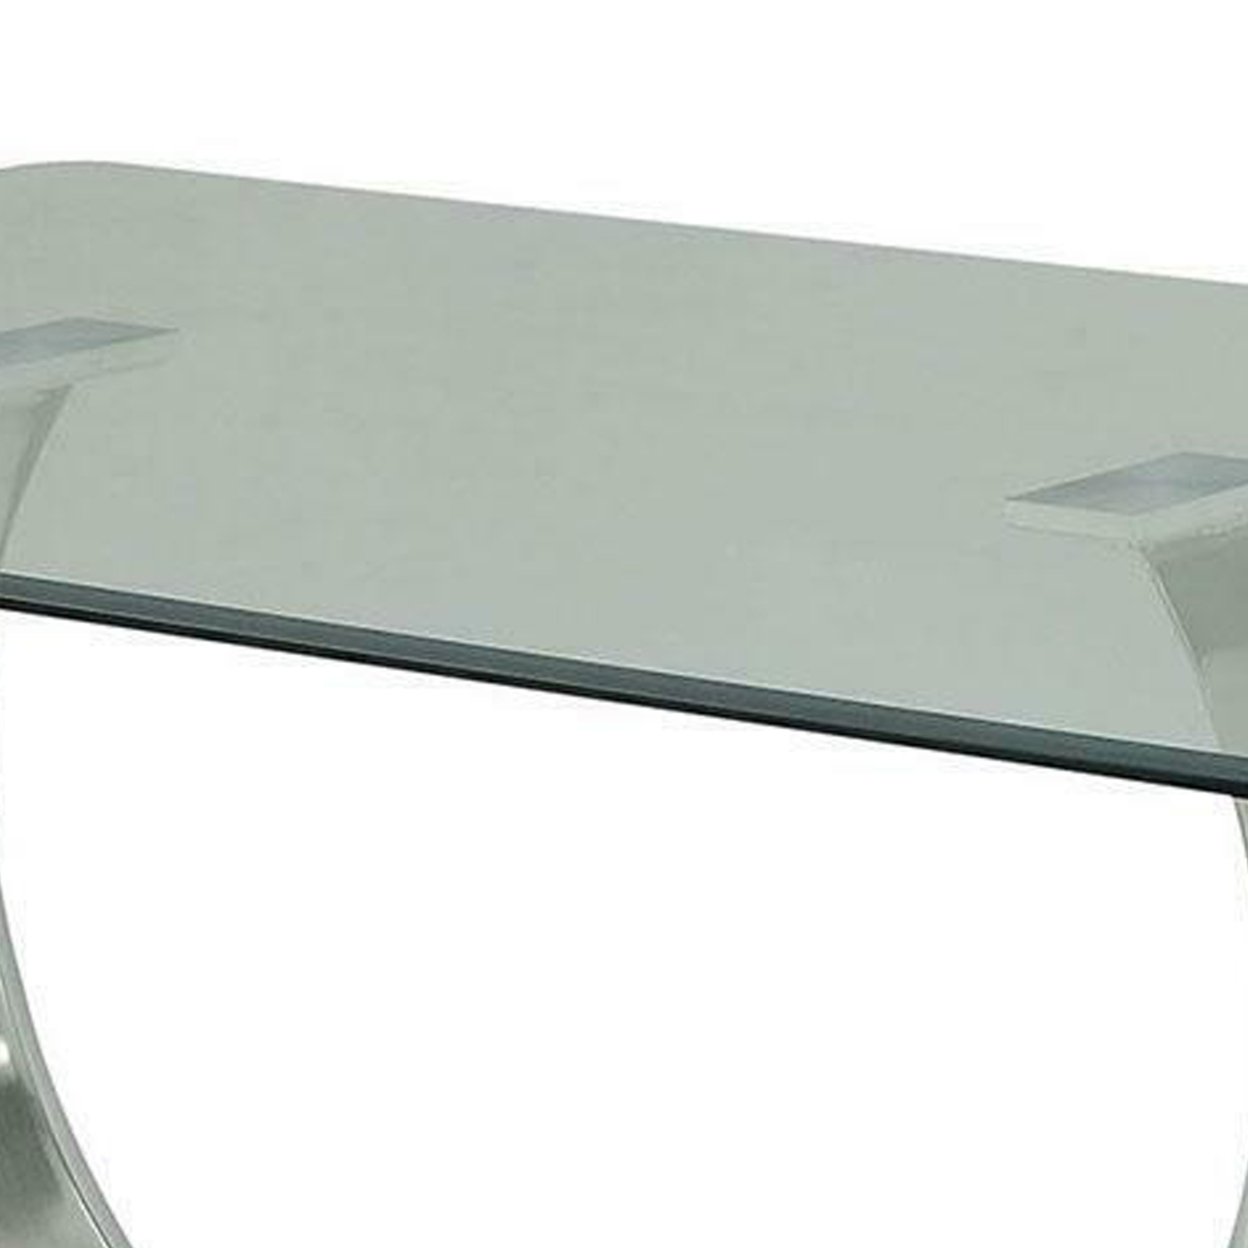 Metal And Glass Dining Table With Unique U Shape Pedestal Base, Chrome And Black- Saltoro Sherpi